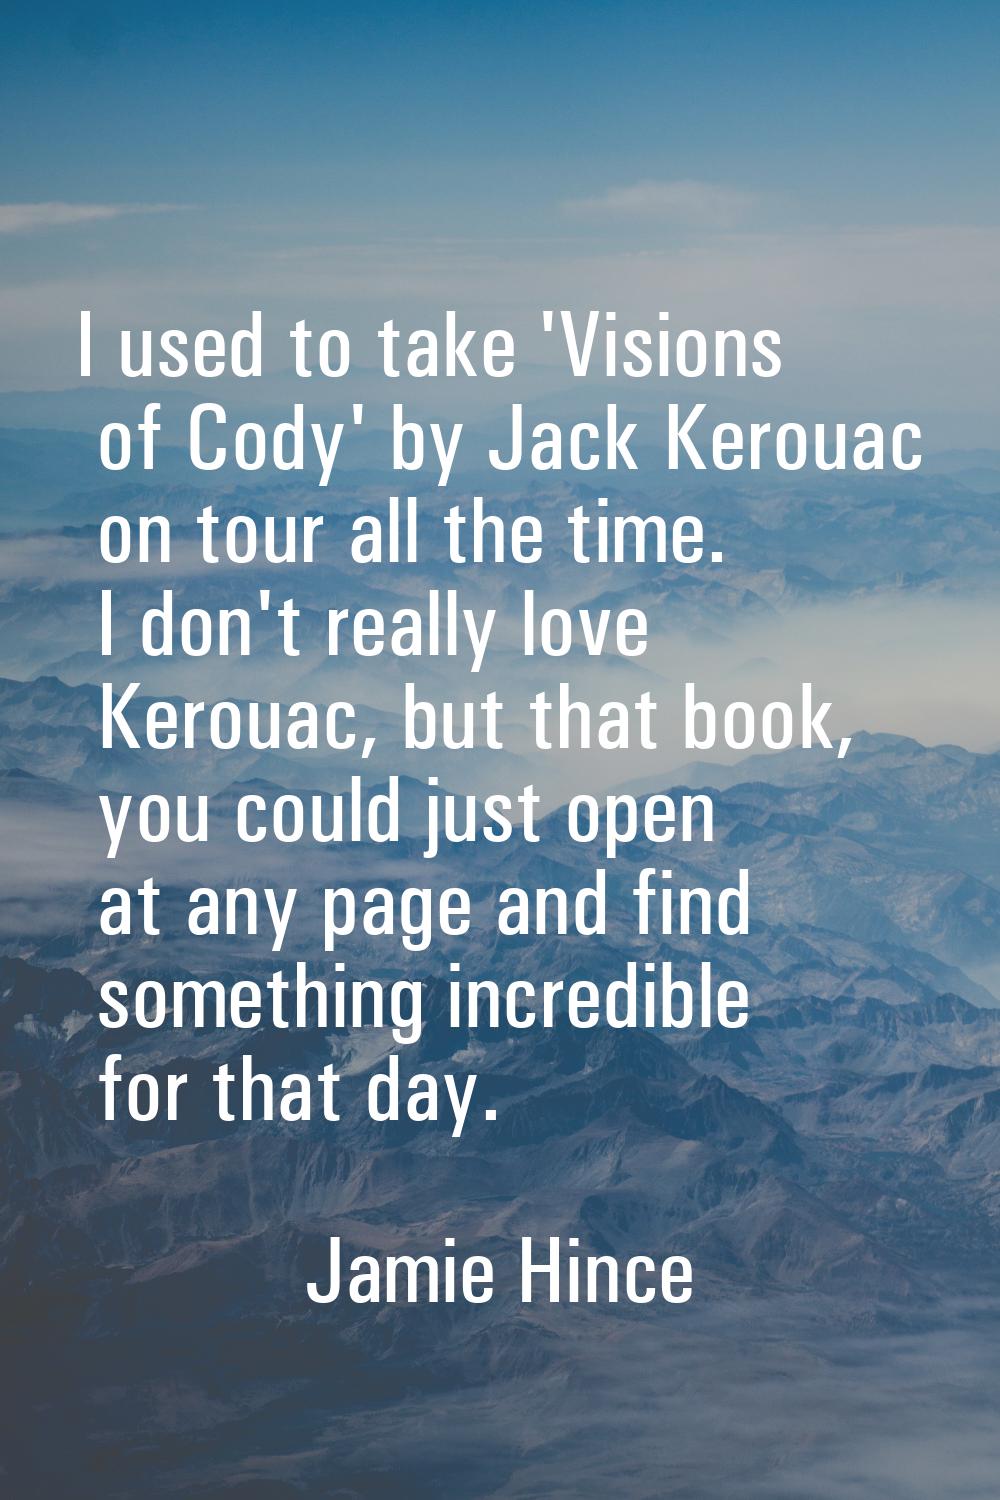 I used to take 'Visions of Cody' by Jack Kerouac on tour all the time. I don't really love Kerouac,